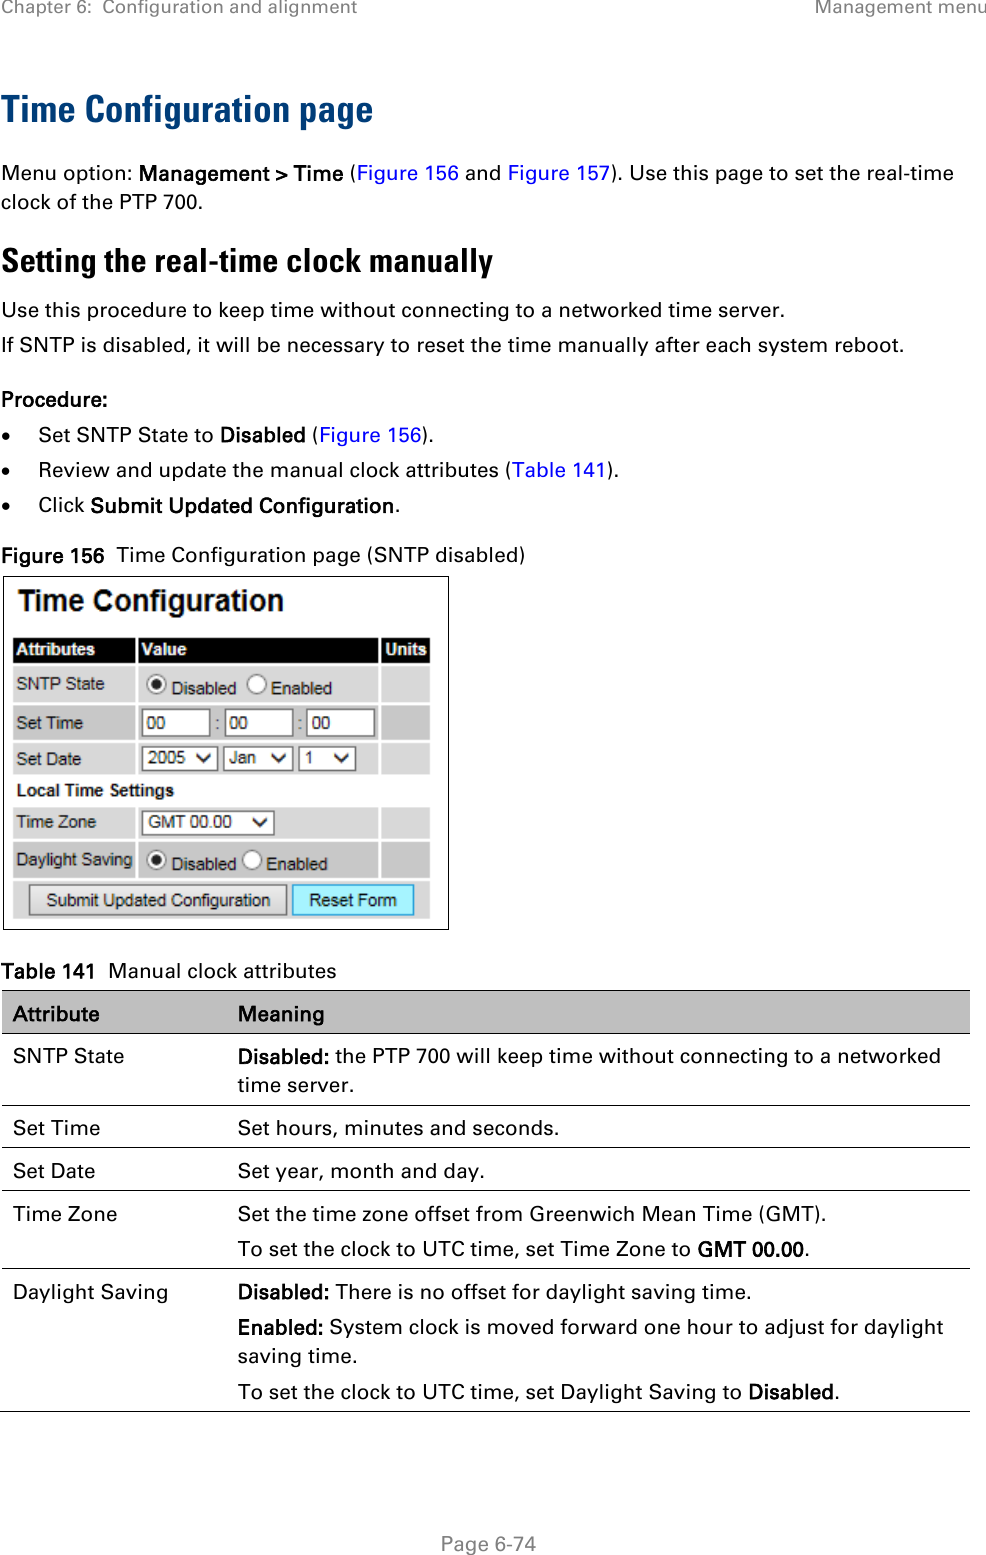 Chapter 6:  Configuration and alignment Management menu  Time Configuration page Menu option: Management &gt; Time (Figure 156 and Figure 157). Use this page to set the real-time clock of the PTP 700. Setting the real-time clock manually Use this procedure to keep time without connecting to a networked time server. If SNTP is disabled, it will be necessary to reset the time manually after each system reboot. Procedure: • Set SNTP State to Disabled (Figure 156). • Review and update the manual clock attributes (Table 141). • Click Submit Updated Configuration. Figure 156  Time Configuration page (SNTP disabled)  Table 141  Manual clock attributes Attribute Meaning SNTP State Disabled: the PTP 700 will keep time without connecting to a networked time server. Set Time Set hours, minutes and seconds. Set Date Set year, month and day. Time Zone Set the time zone offset from Greenwich Mean Time (GMT). To set the clock to UTC time, set Time Zone to GMT 00.00. Daylight Saving Disabled: There is no offset for daylight saving time. Enabled: System clock is moved forward one hour to adjust for daylight saving time. To set the clock to UTC time, set Daylight Saving to Disabled.  Page 6-74 